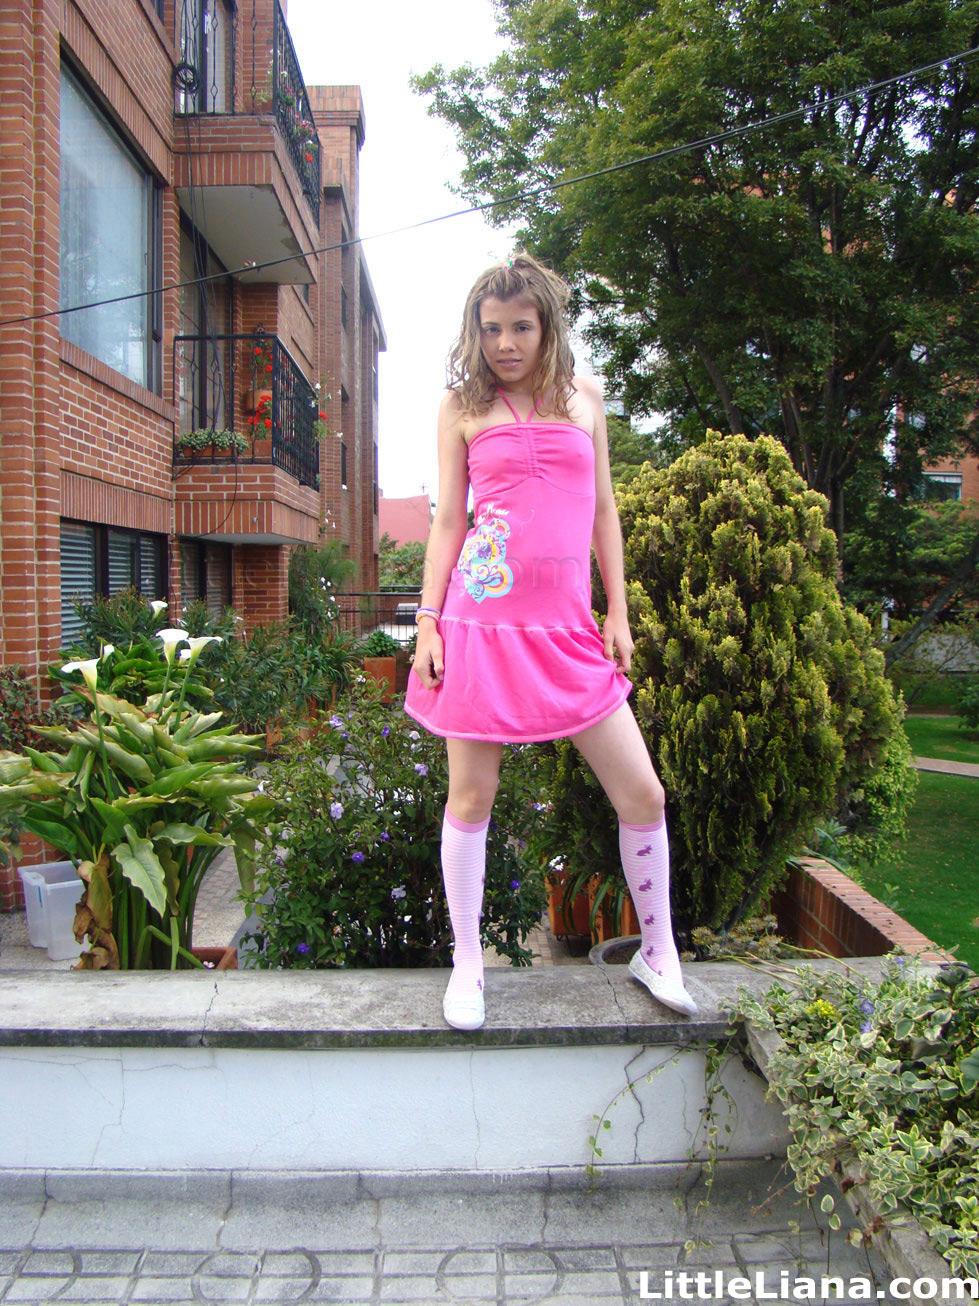 Pictures of teen girl Little Liana looking pretty in pink #59023137